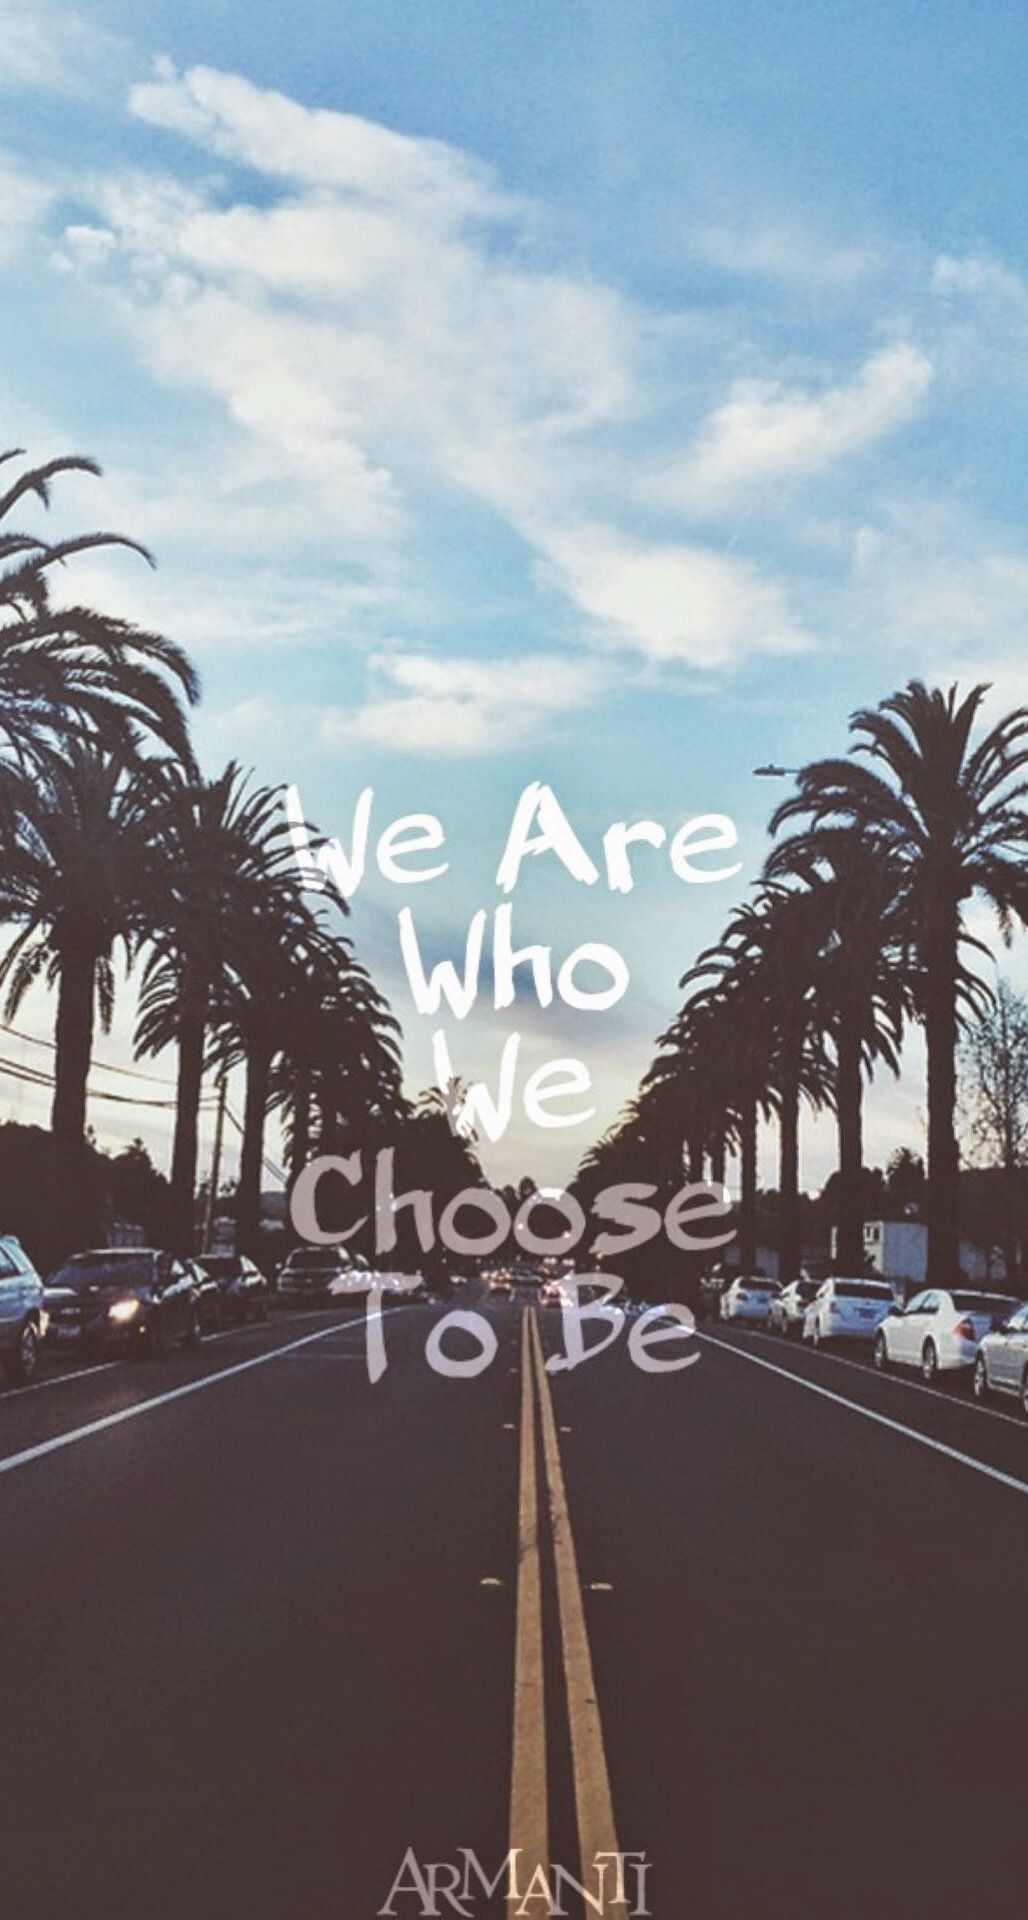 We Are Who We Are 2020 Wallpapers